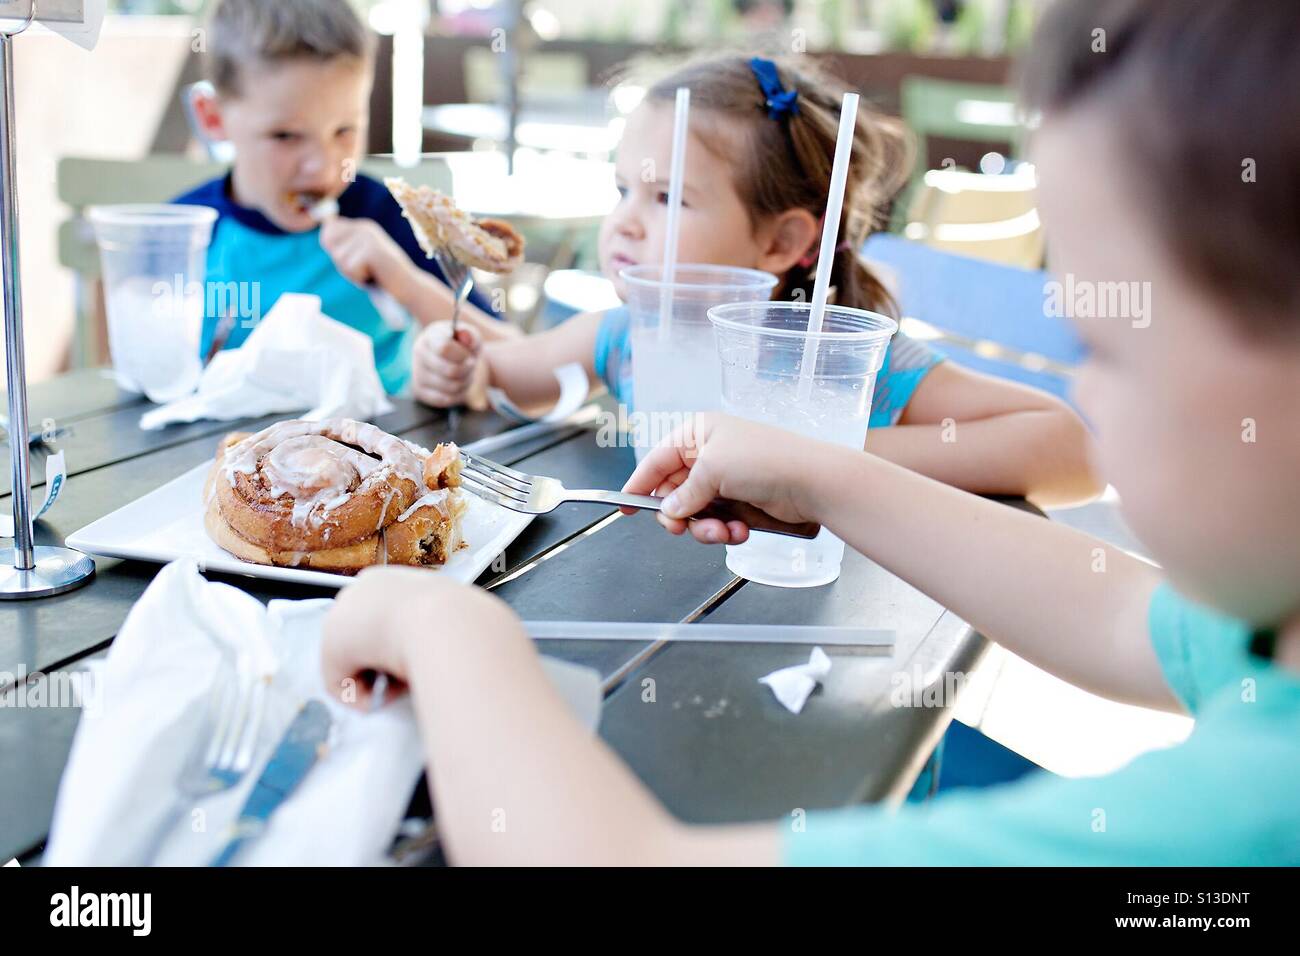 Kids eating a giant cinnamon roll at a restaurant Stock Photo